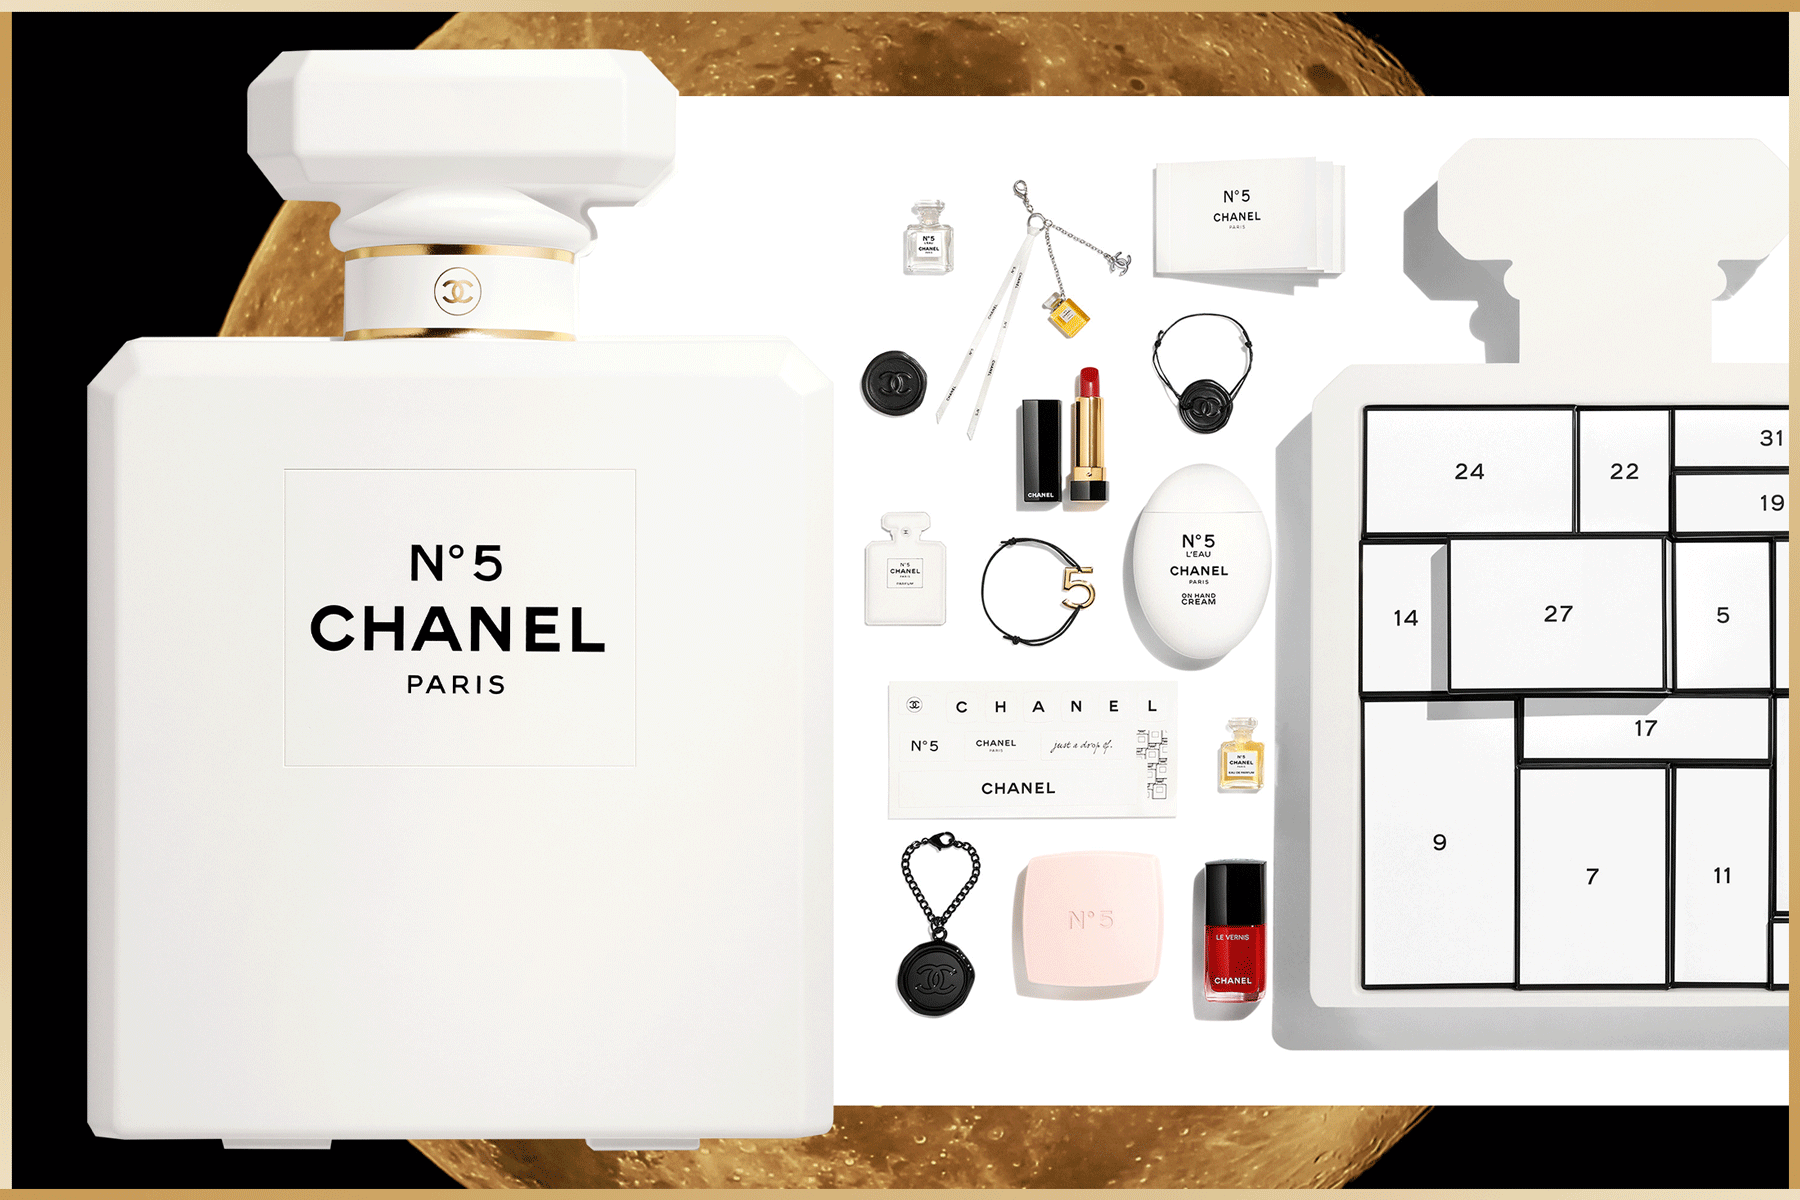 Chanel Holiday: Celebrate 100 years of N˚5